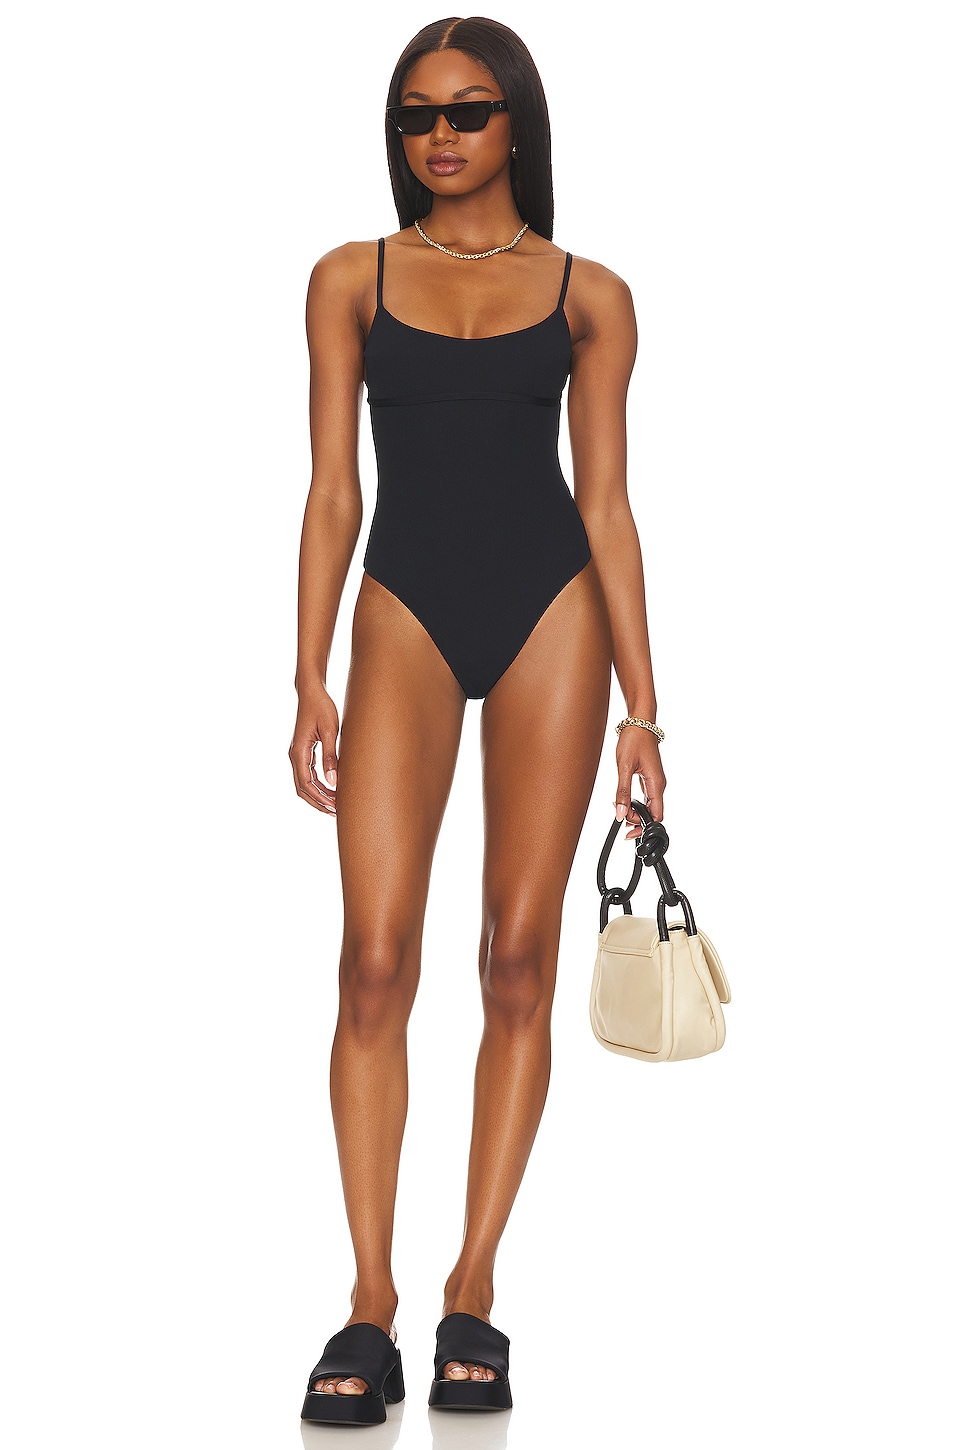 Ribbed Bree One Piece Swimsuit - Black